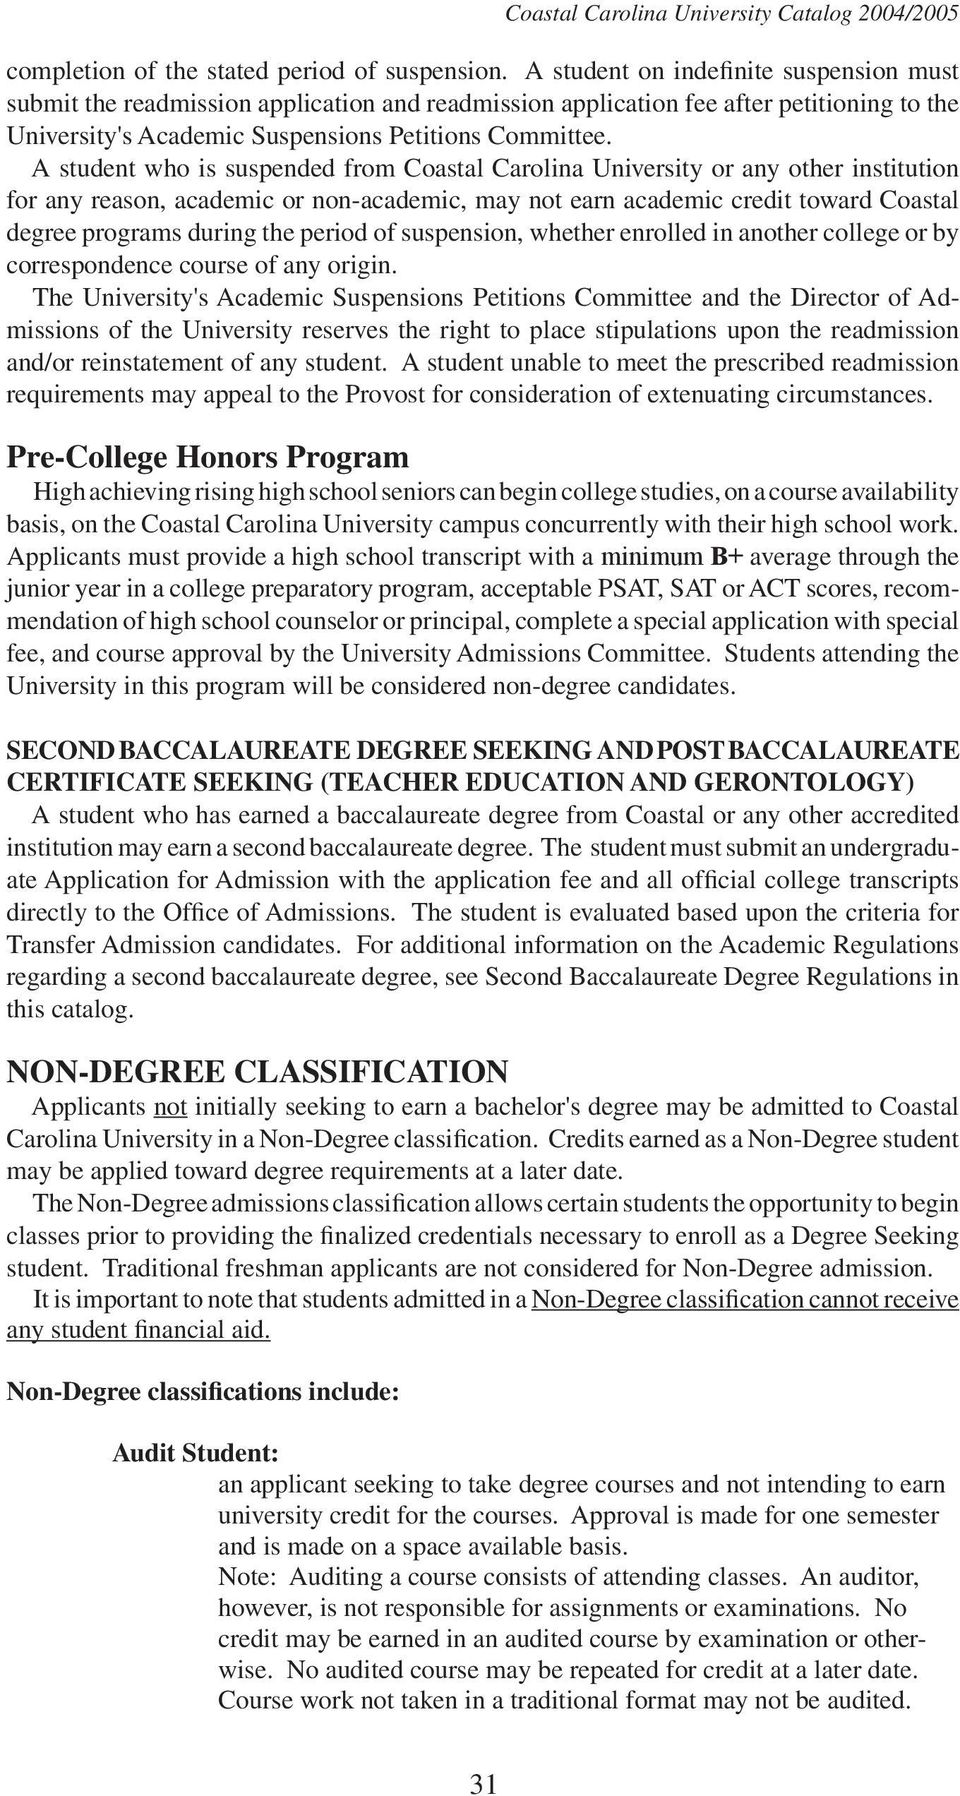 A student who is suspended from Coastal Carolina University or any other institution for any reason, academic or non-academic, may not earn academic credit toward Coastal degree programs during the